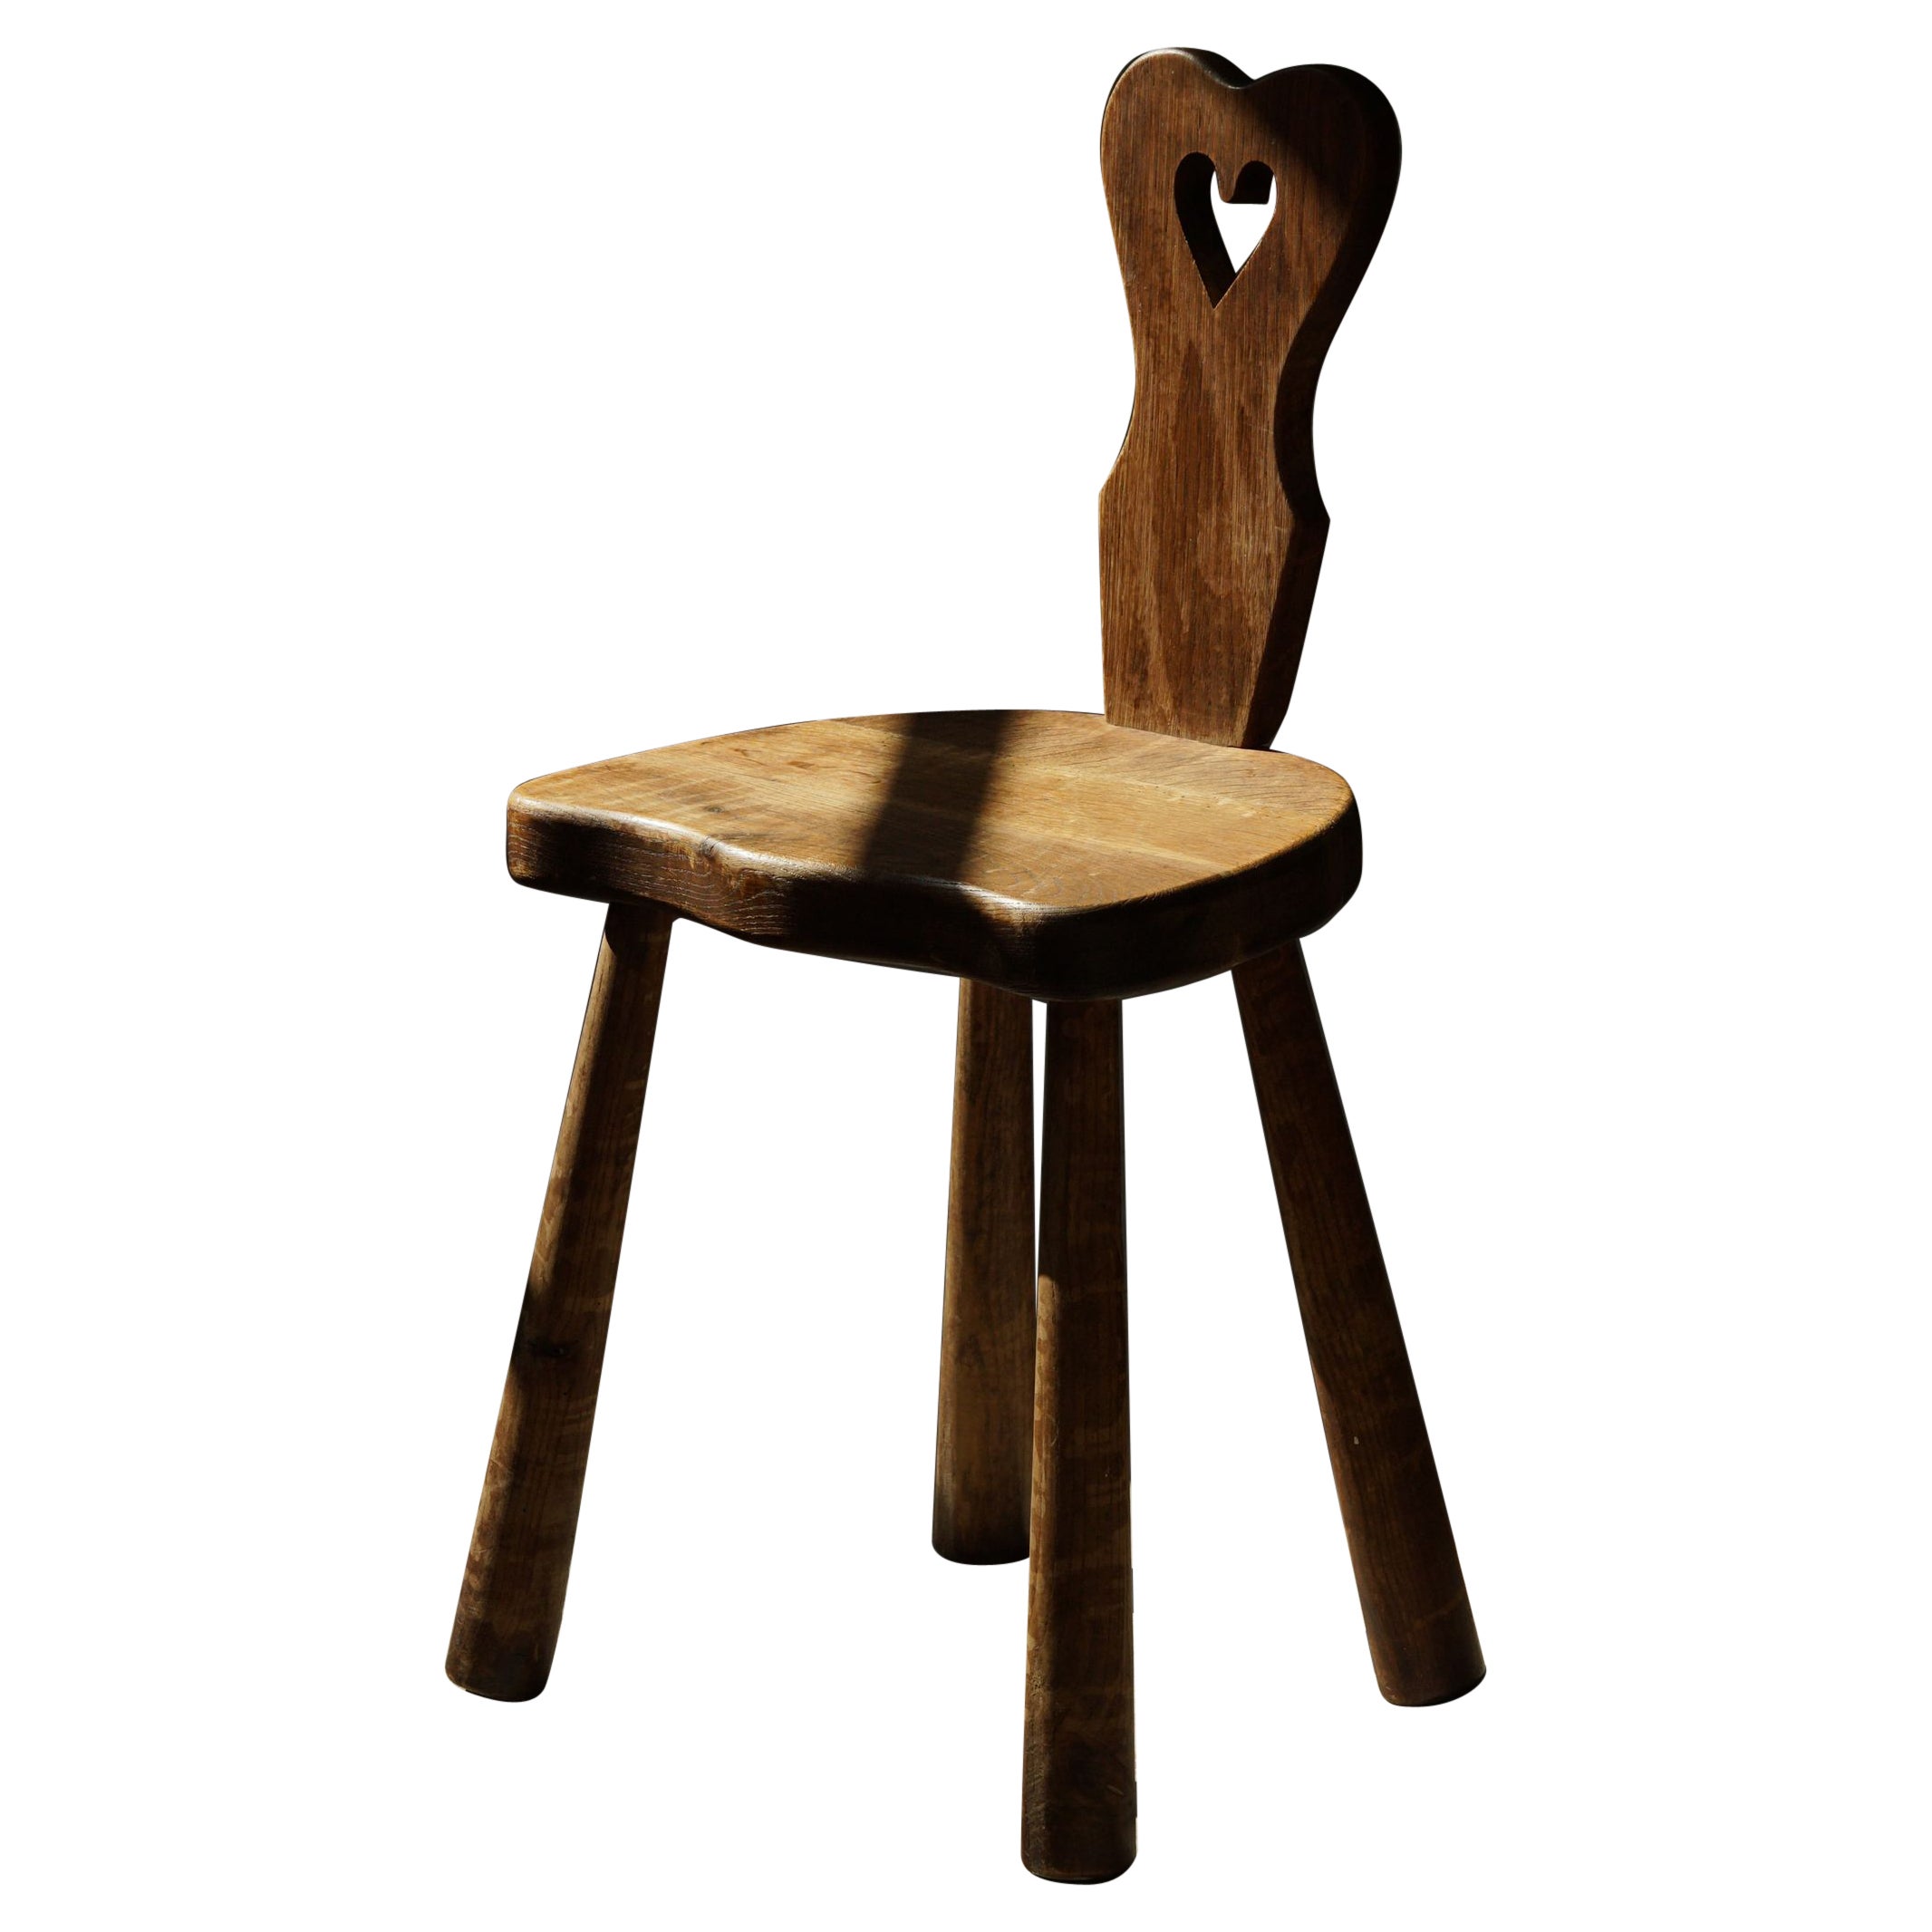 Sculptural Danish Heart Chair in Solid Oak, Early 20th Century